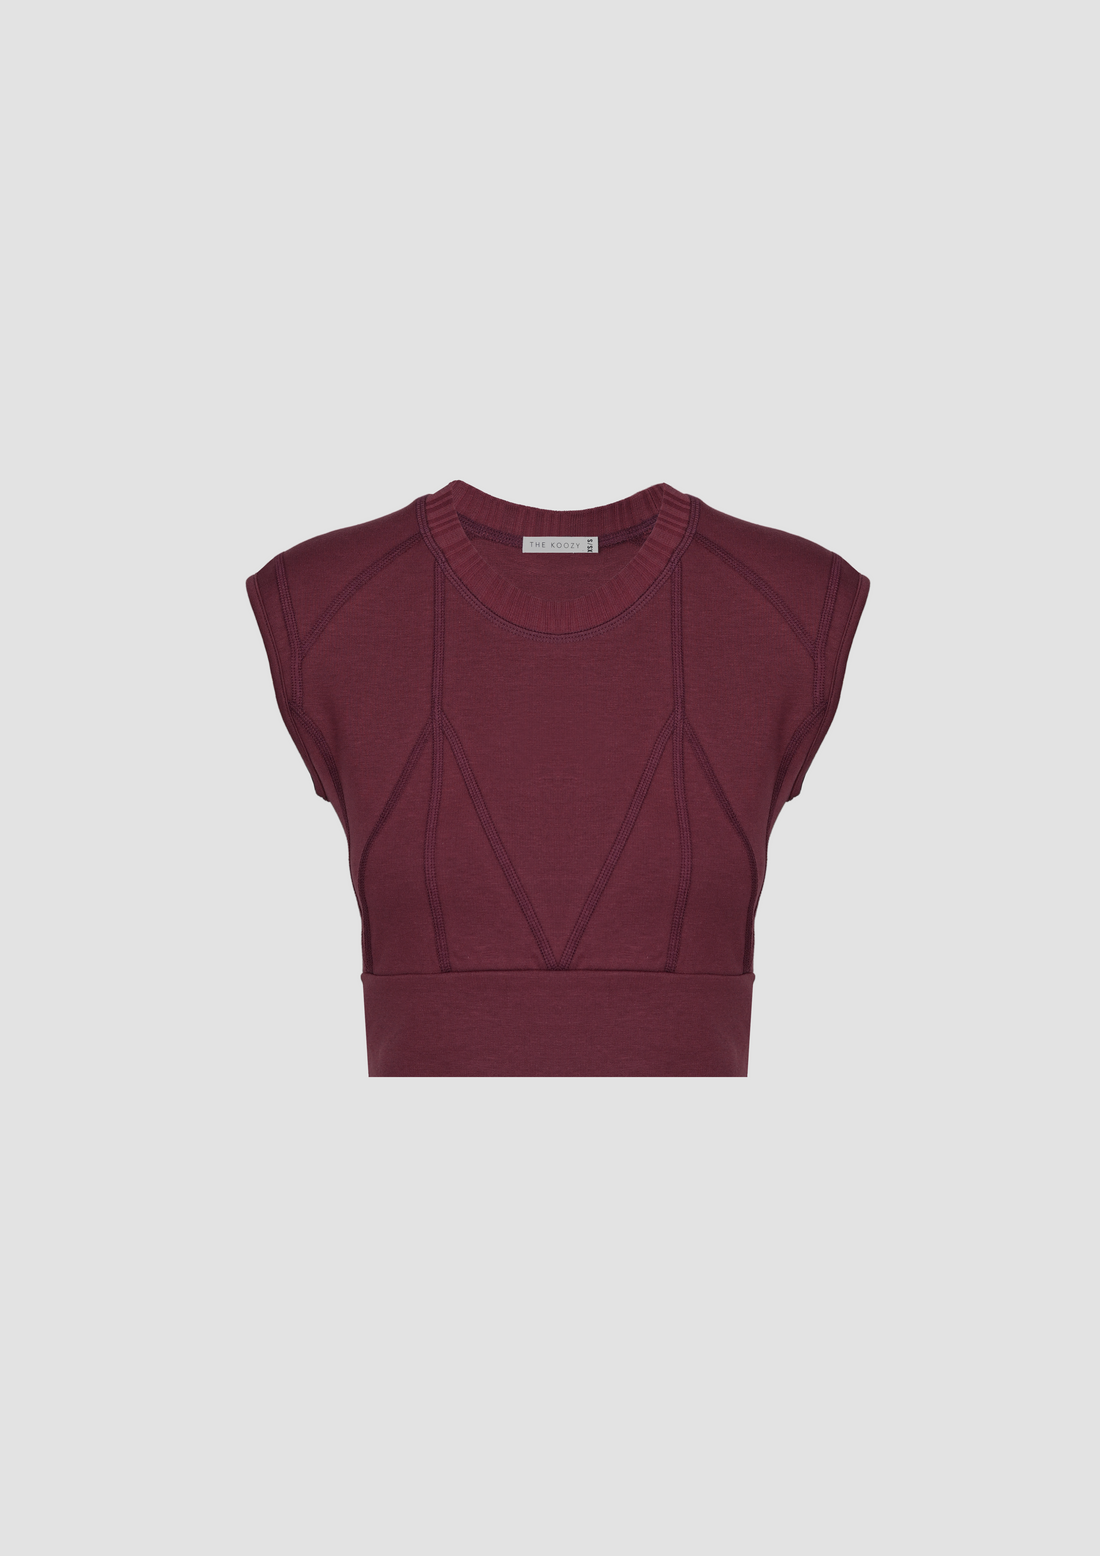 Neva Top in TENCEL™ Lyocell and Organic Cotton in Burgundy